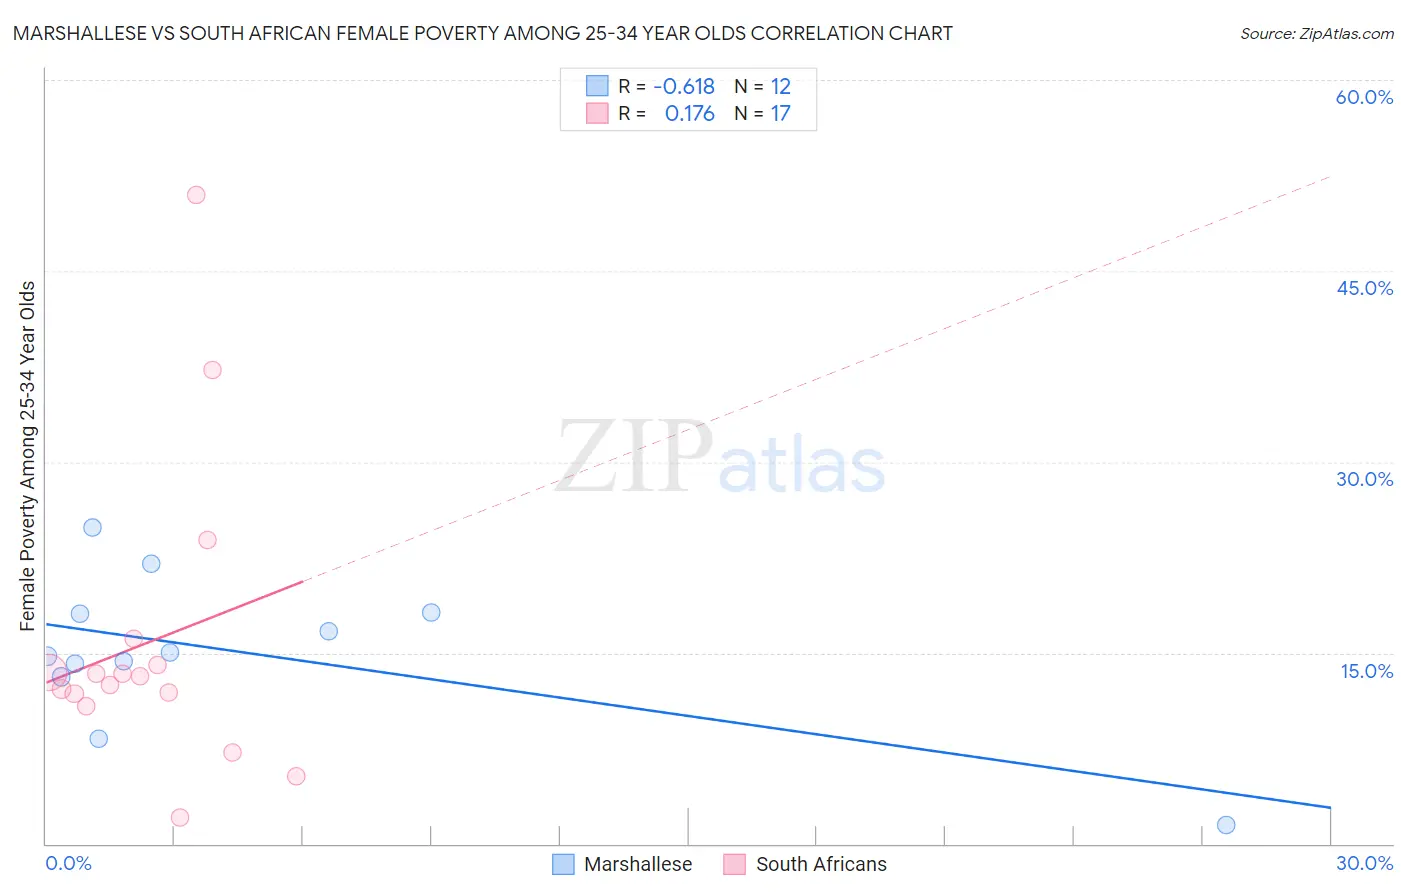 Marshallese vs South African Female Poverty Among 25-34 Year Olds